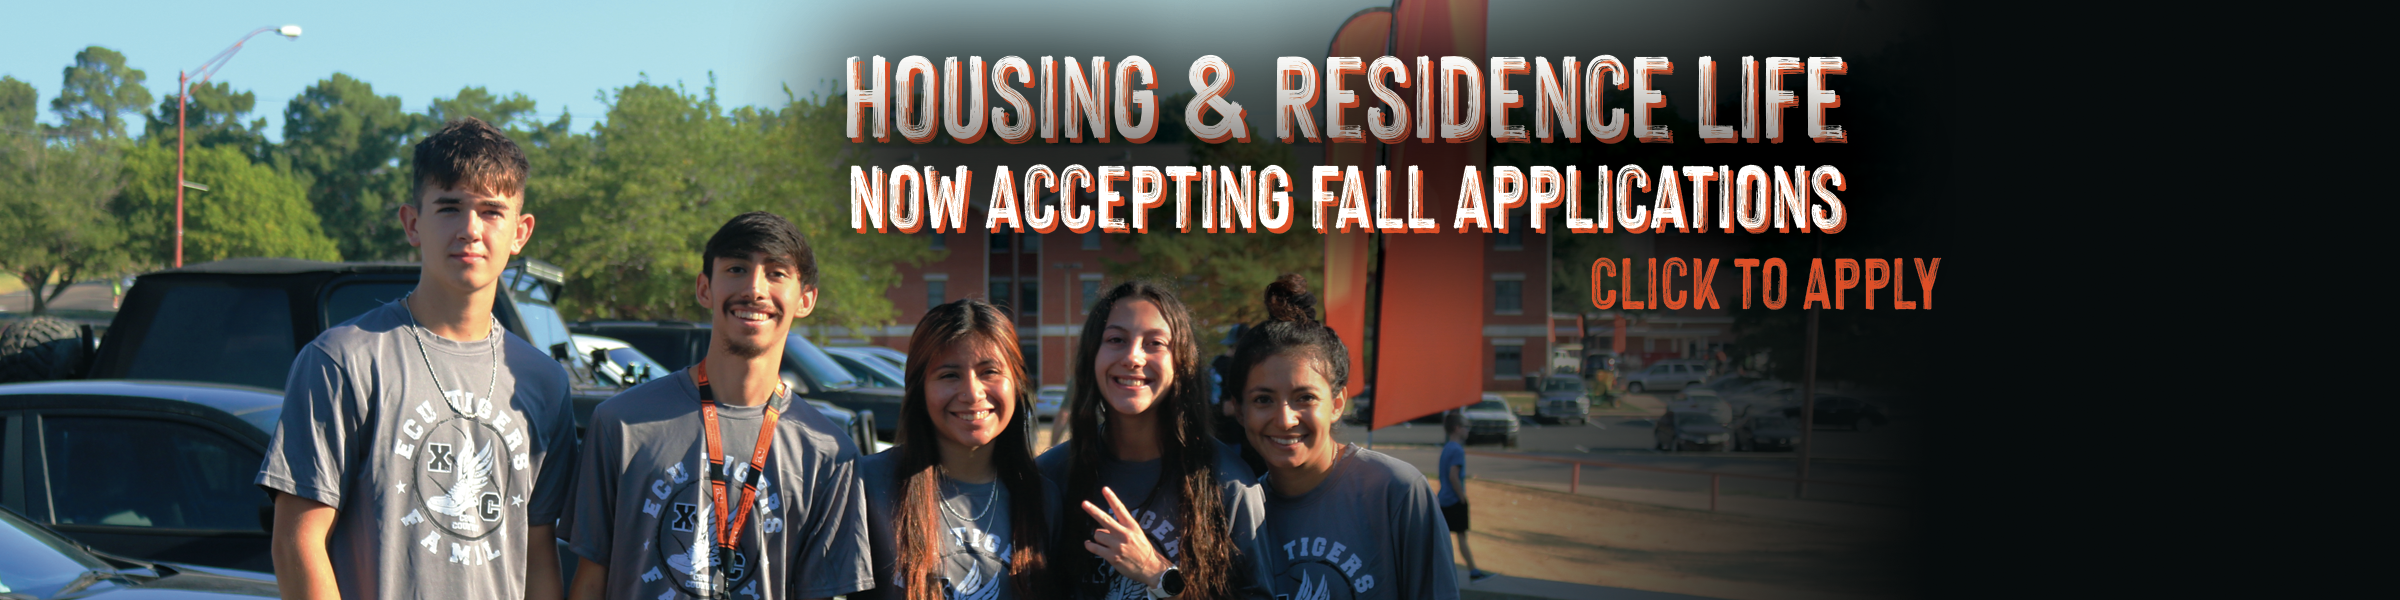 Housing & Residence Fall Applications are now open. Click to apply